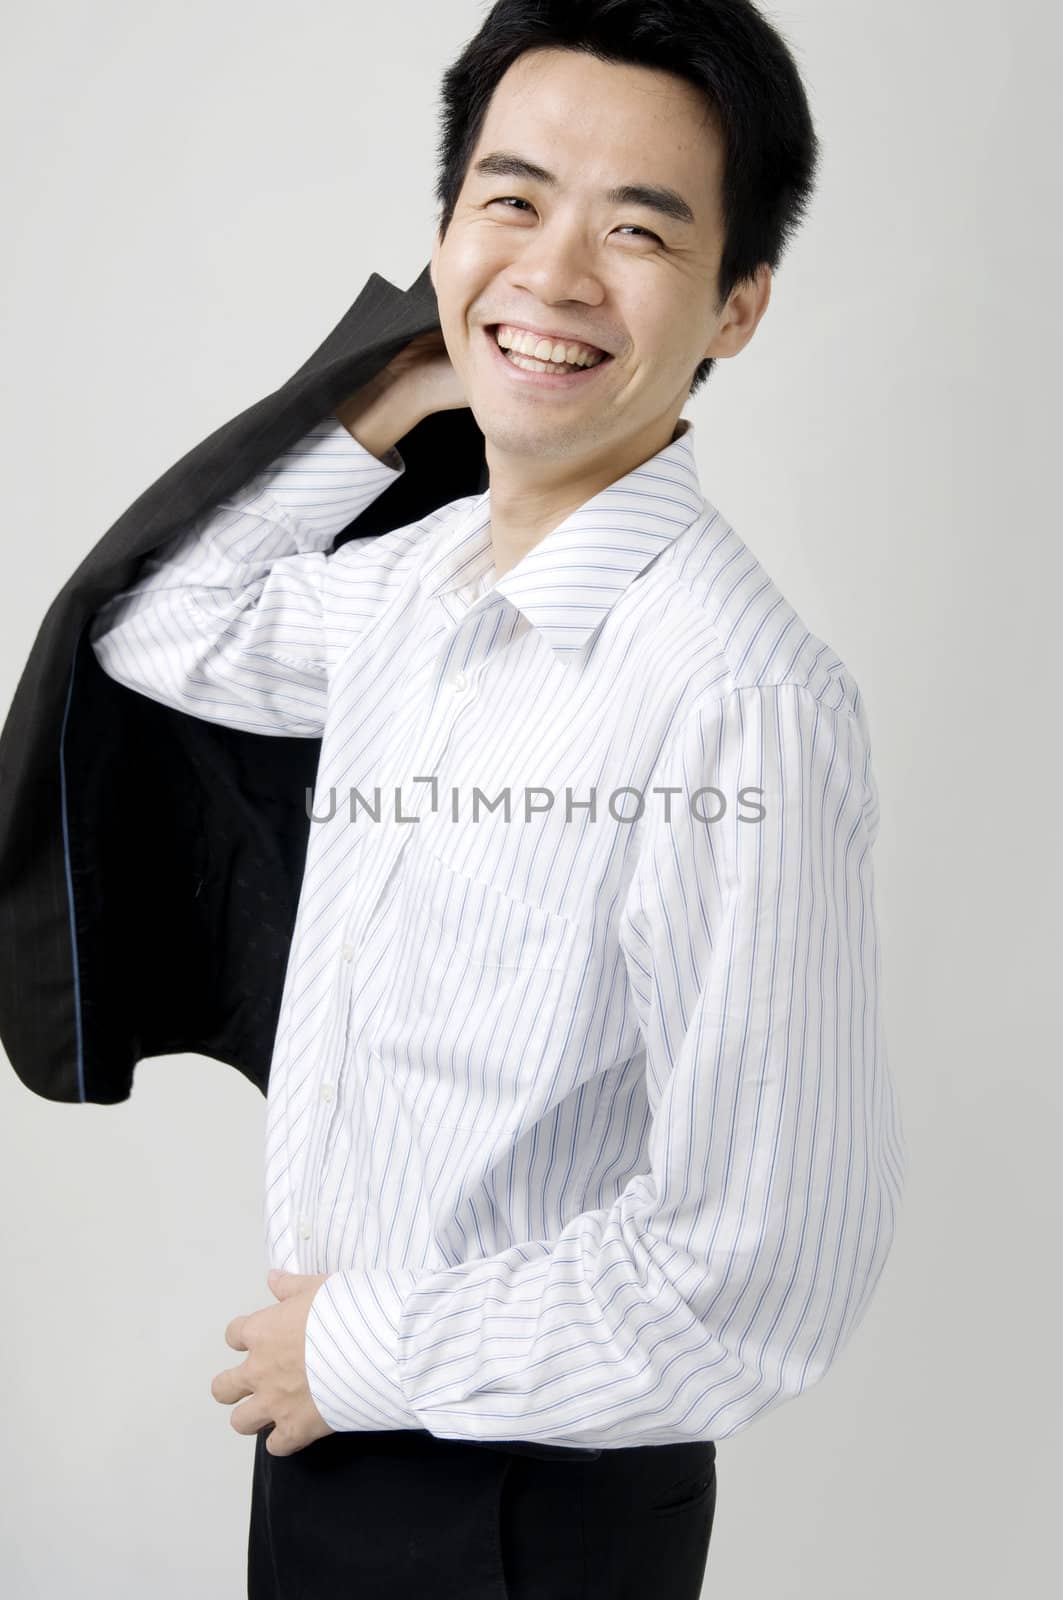 young asian business man smiling with a coat 